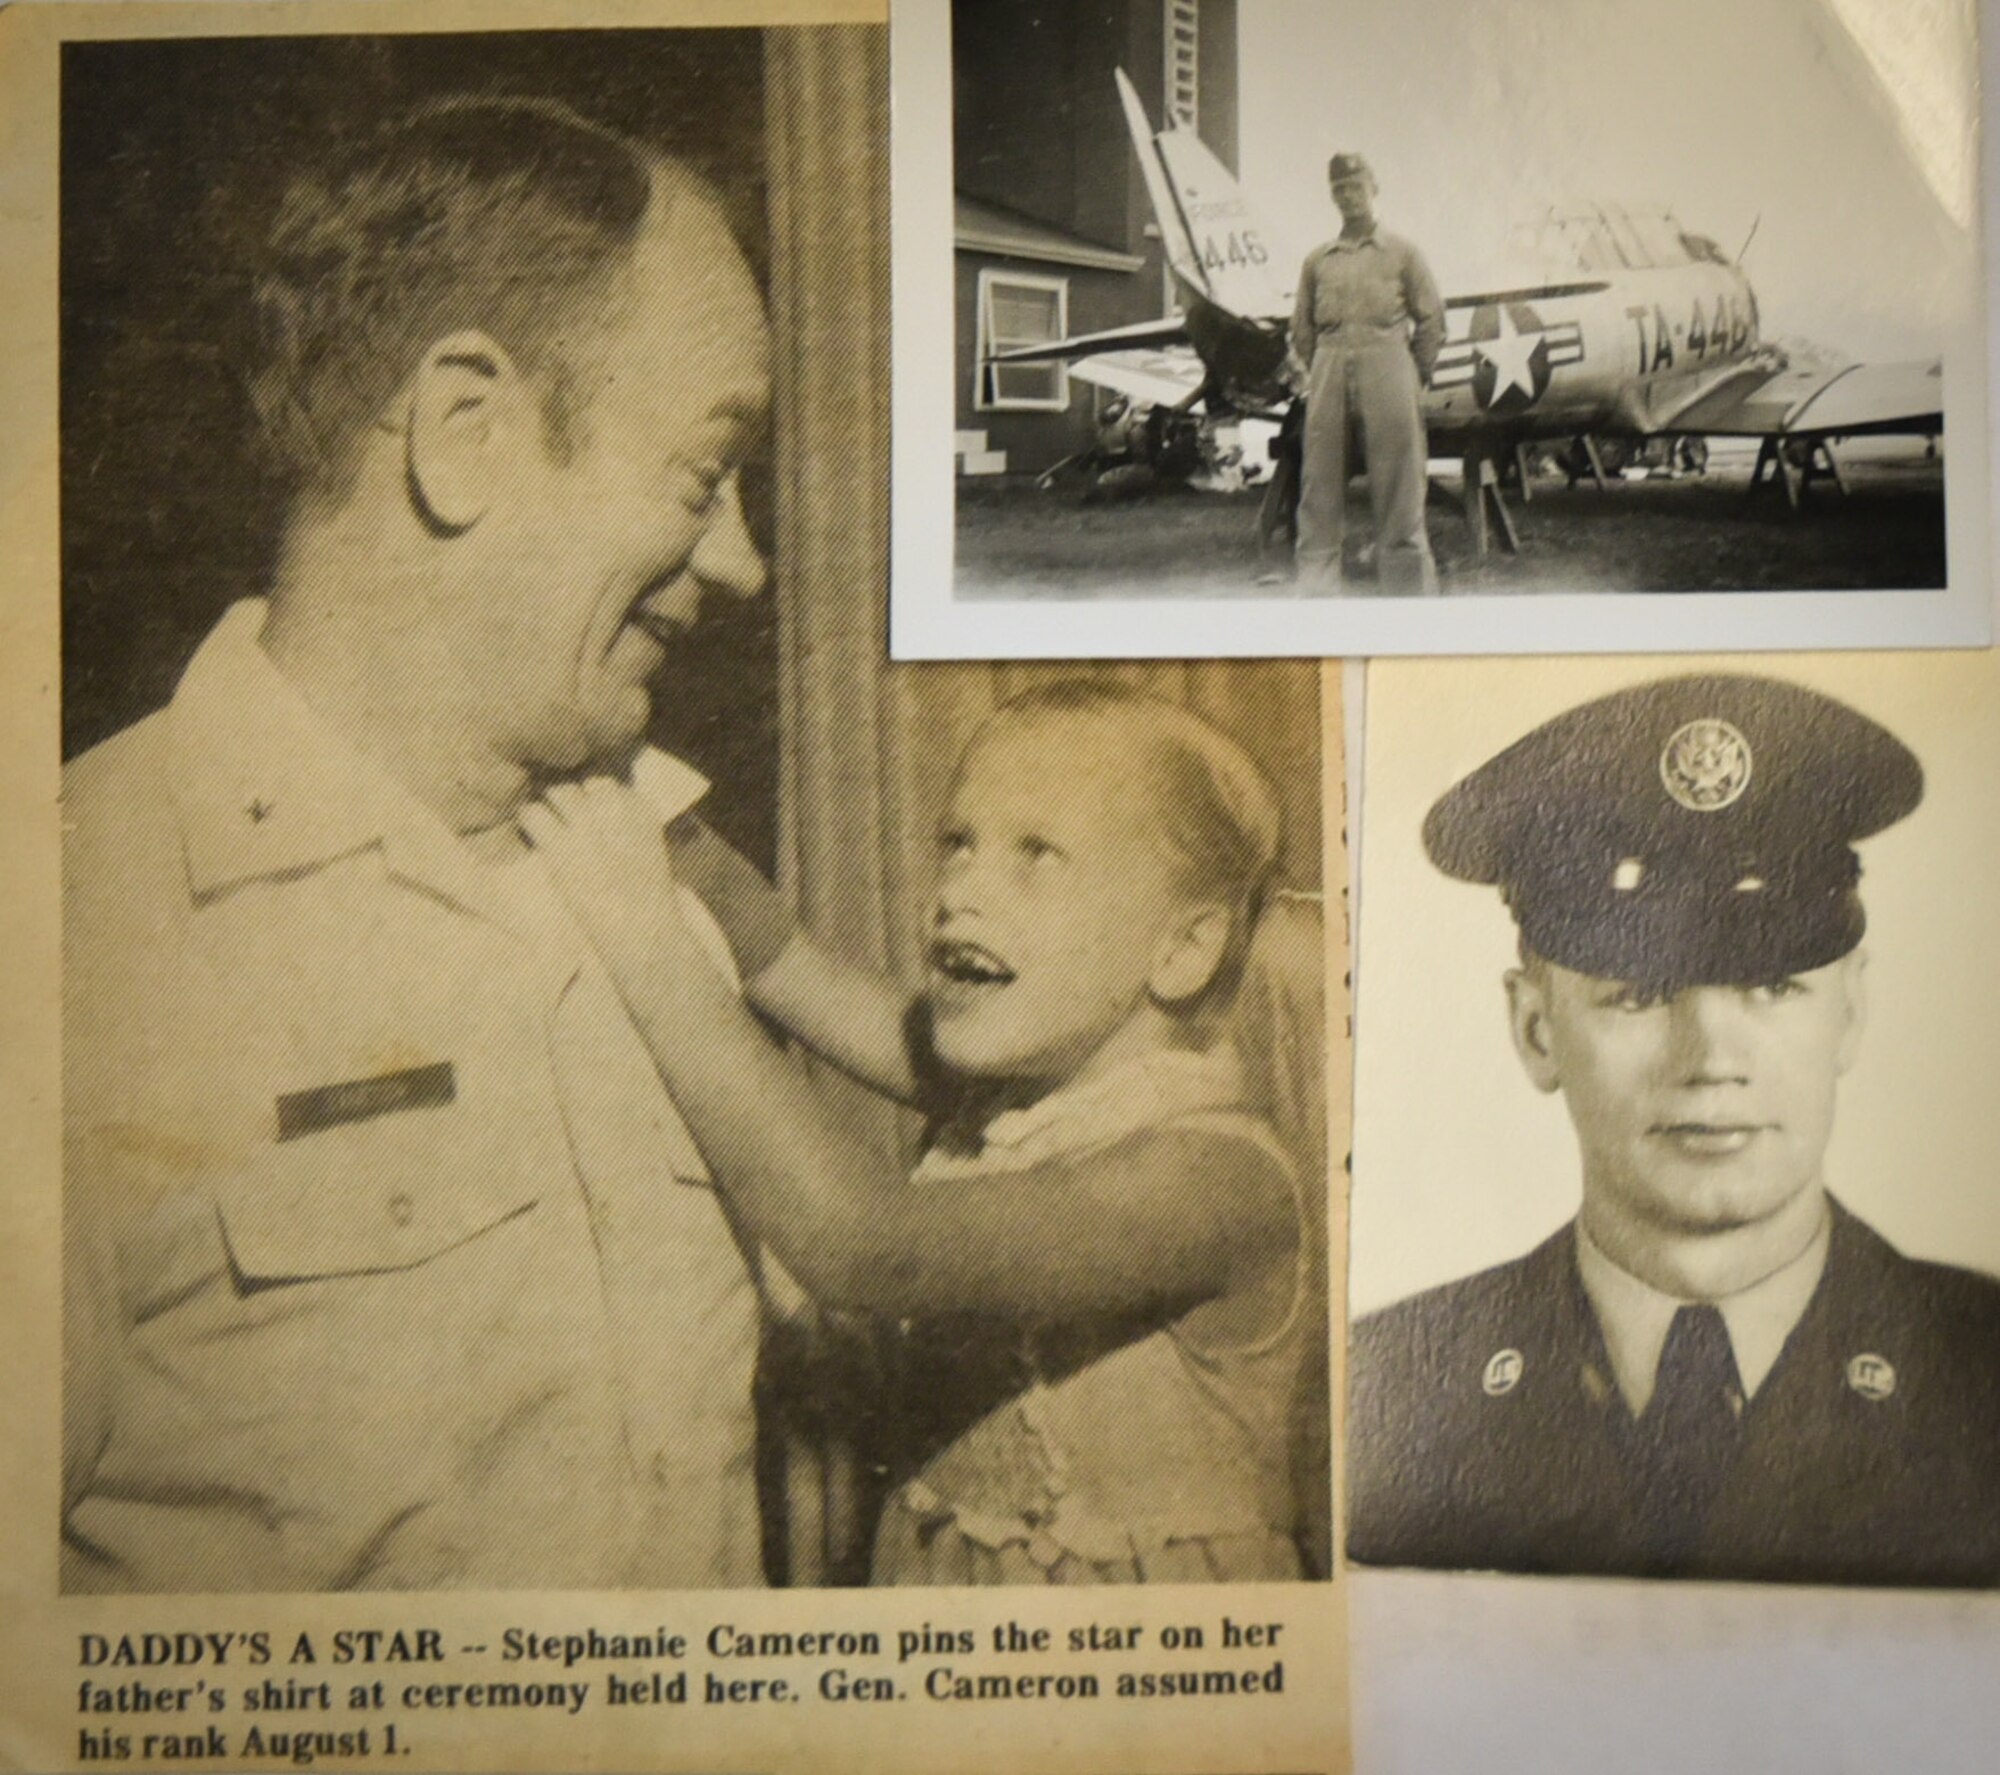 A collage of photos shared from Brig. Gen. Lyle Cameron's family spanning from his life. His daughter Stephanie pins on his star during his promotion ceremony to Brig. Gen. on Aug. 1, 1973, and a young Cameron with his Republic F-84 Thunderjet on July 26, 1951. (Courtesy photos)